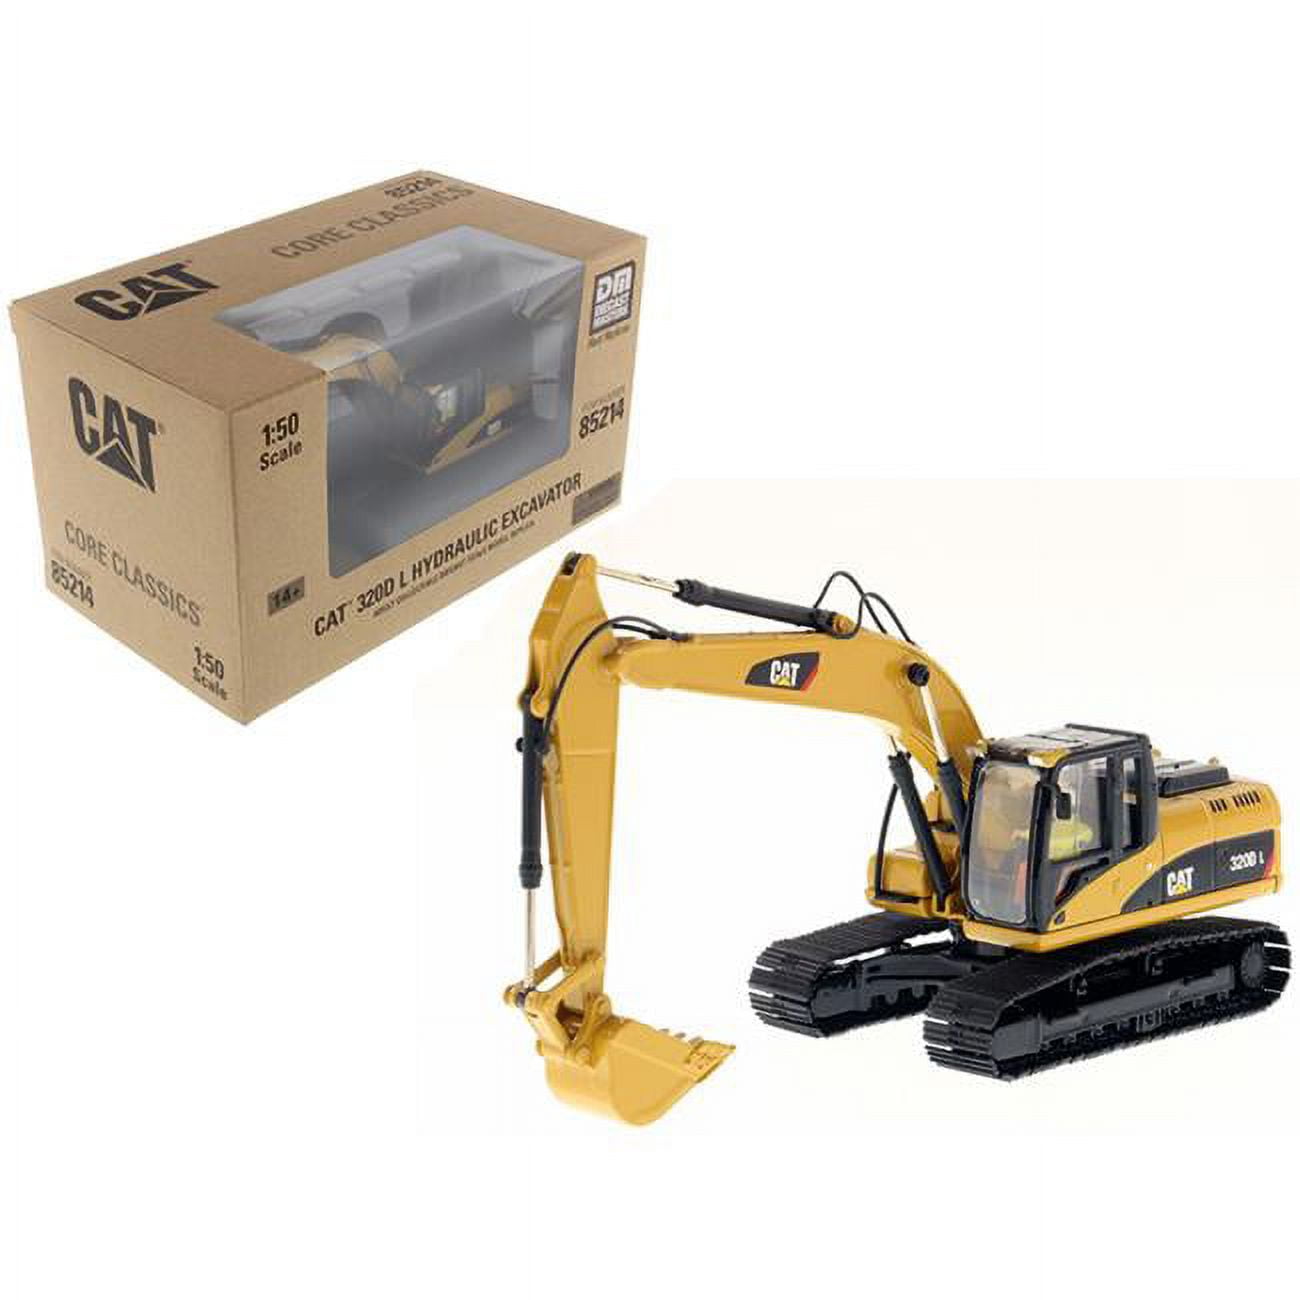 85214c 1 By 50 Scale Diecast Hydraulic Excavator For Cat Caterpillar 320d L Model